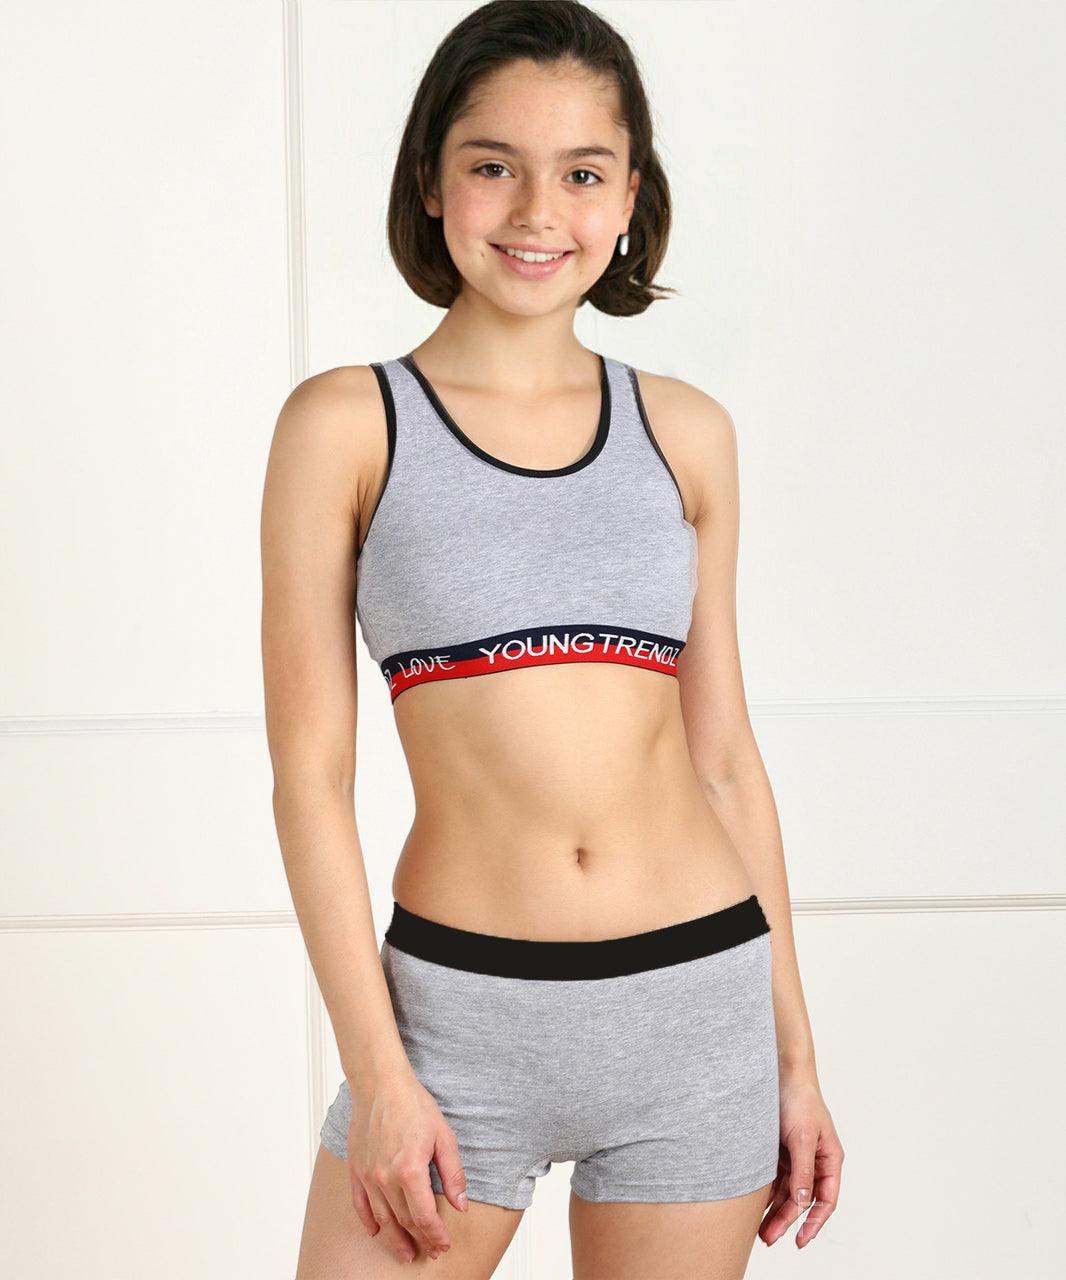 Wholesale Cotton Padded Training Bra For Girls Young Student